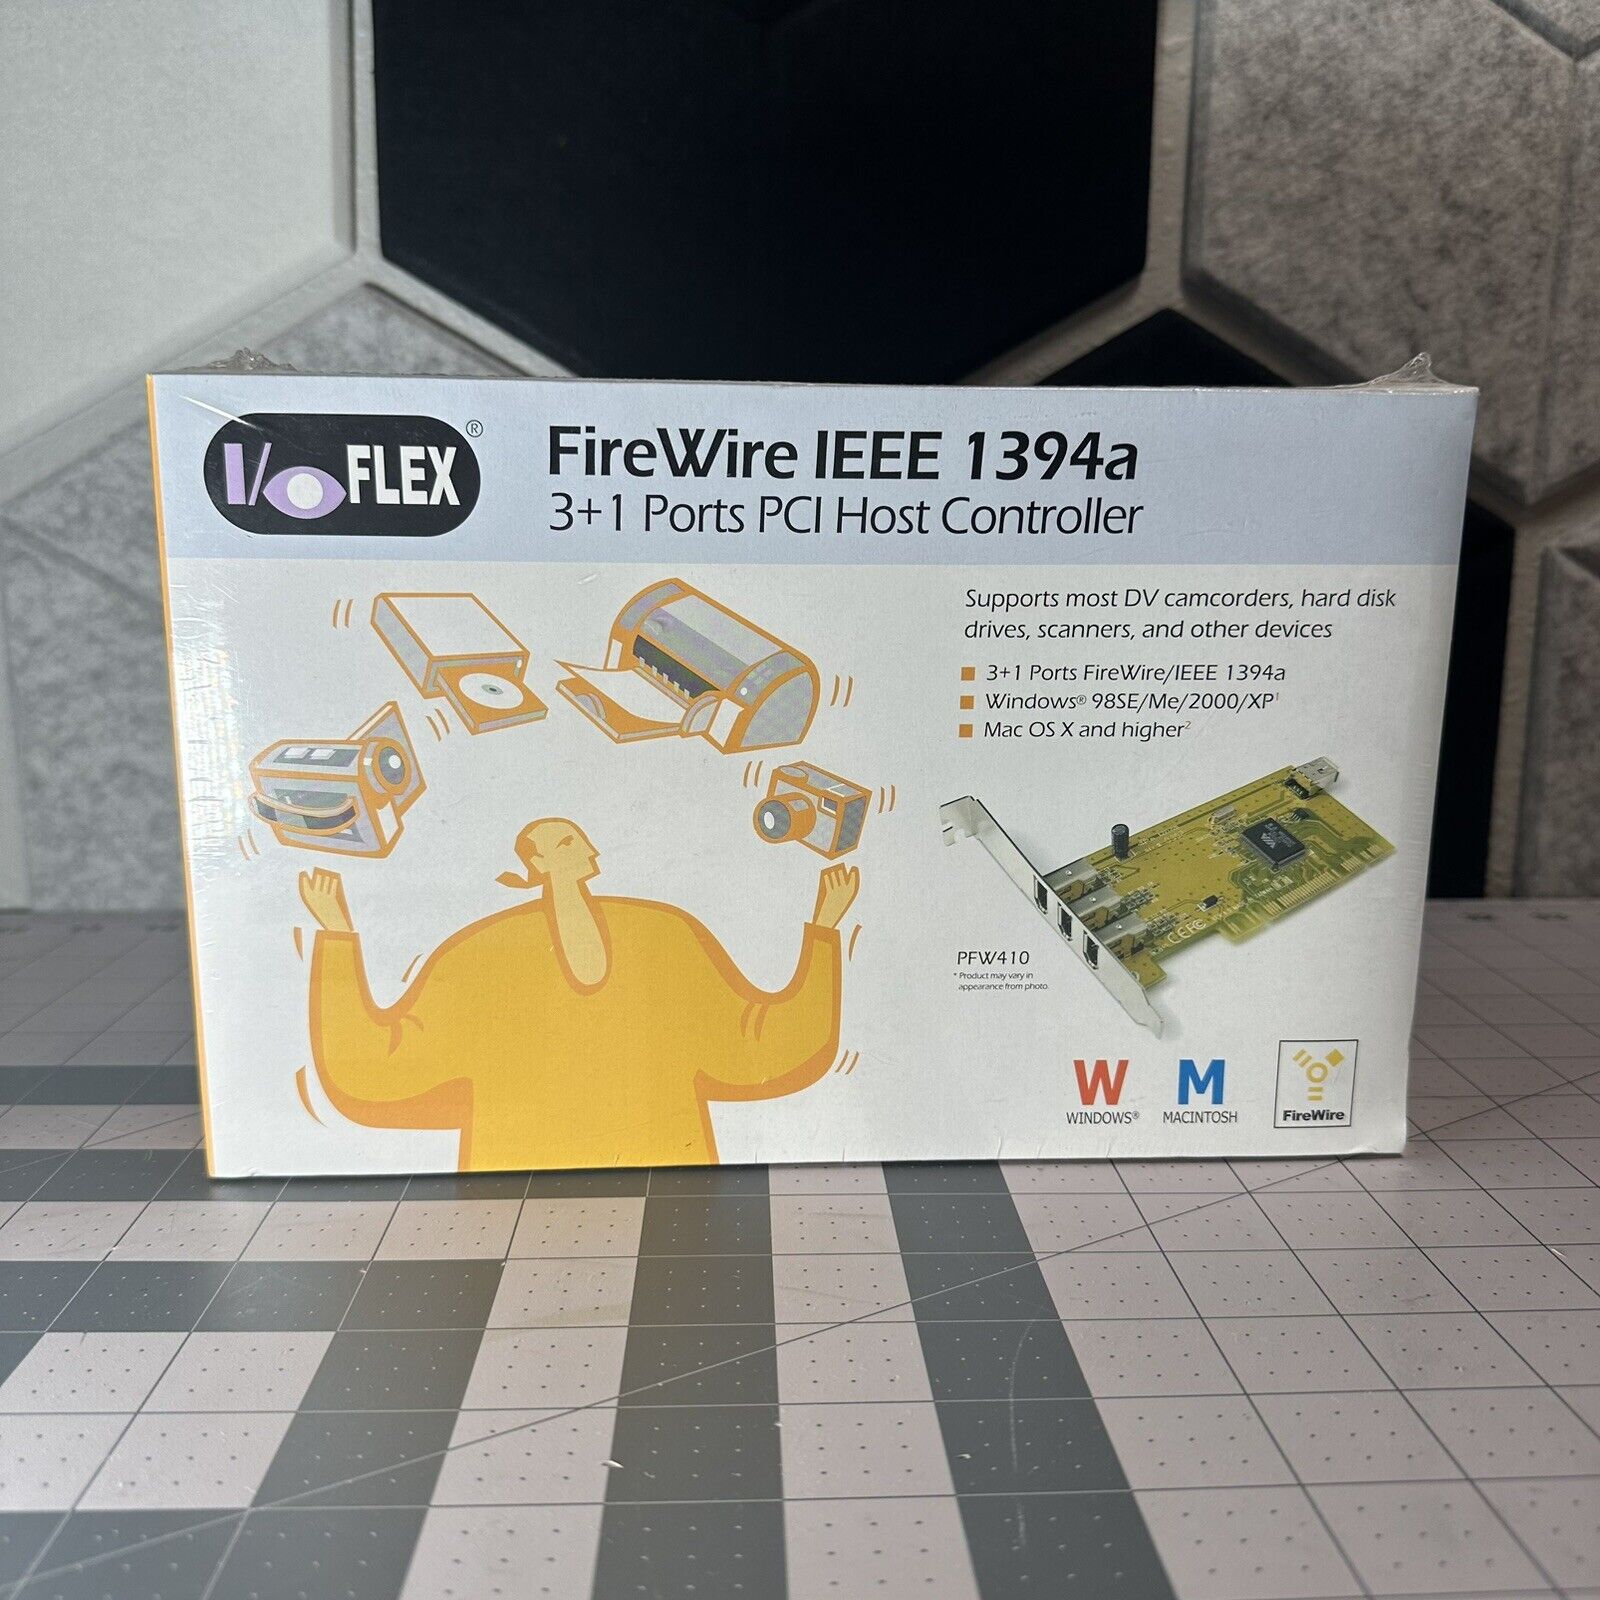 IO Flex FireWire IEEE 1394a Adapter 3+1 Ports PCI Host Controller - SEALED VTG